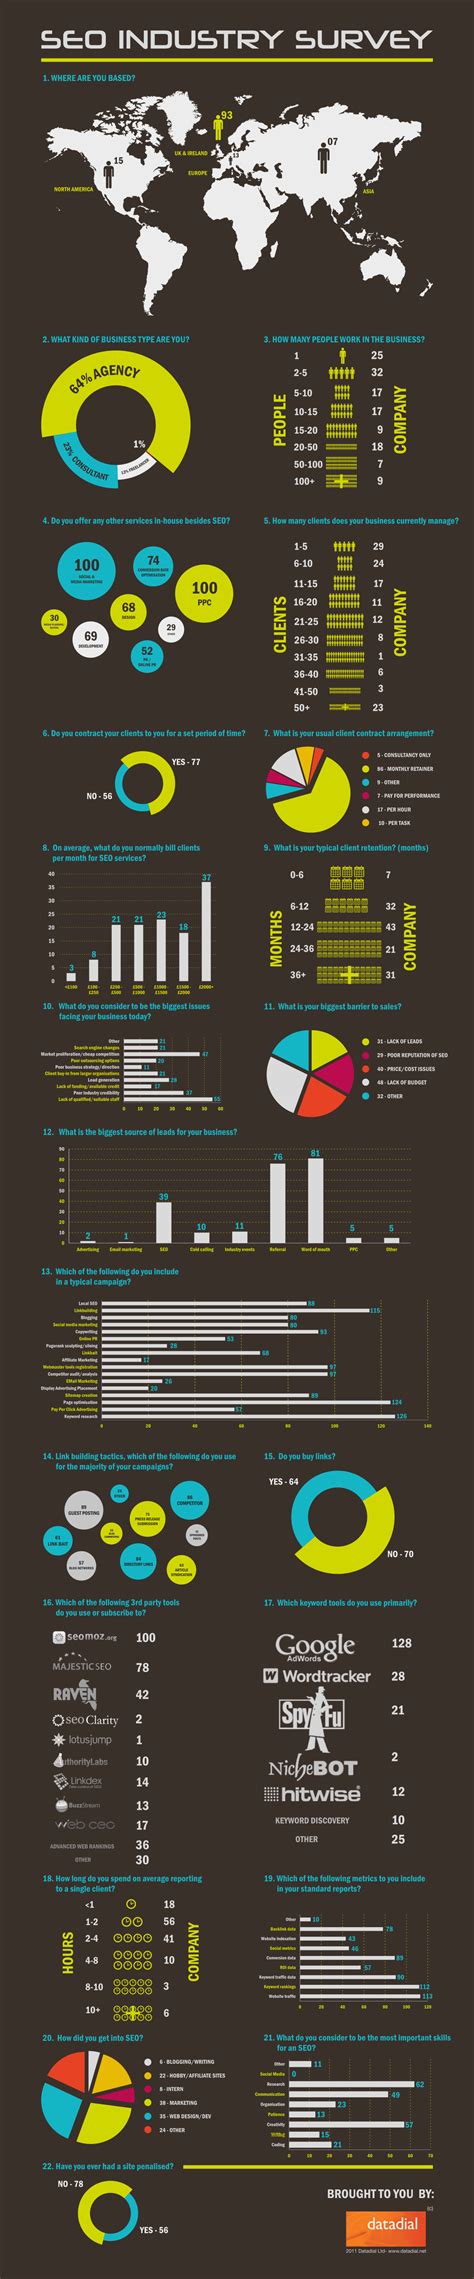 [SEO] Datadial_SEO Industry Survey Results(Infographic)